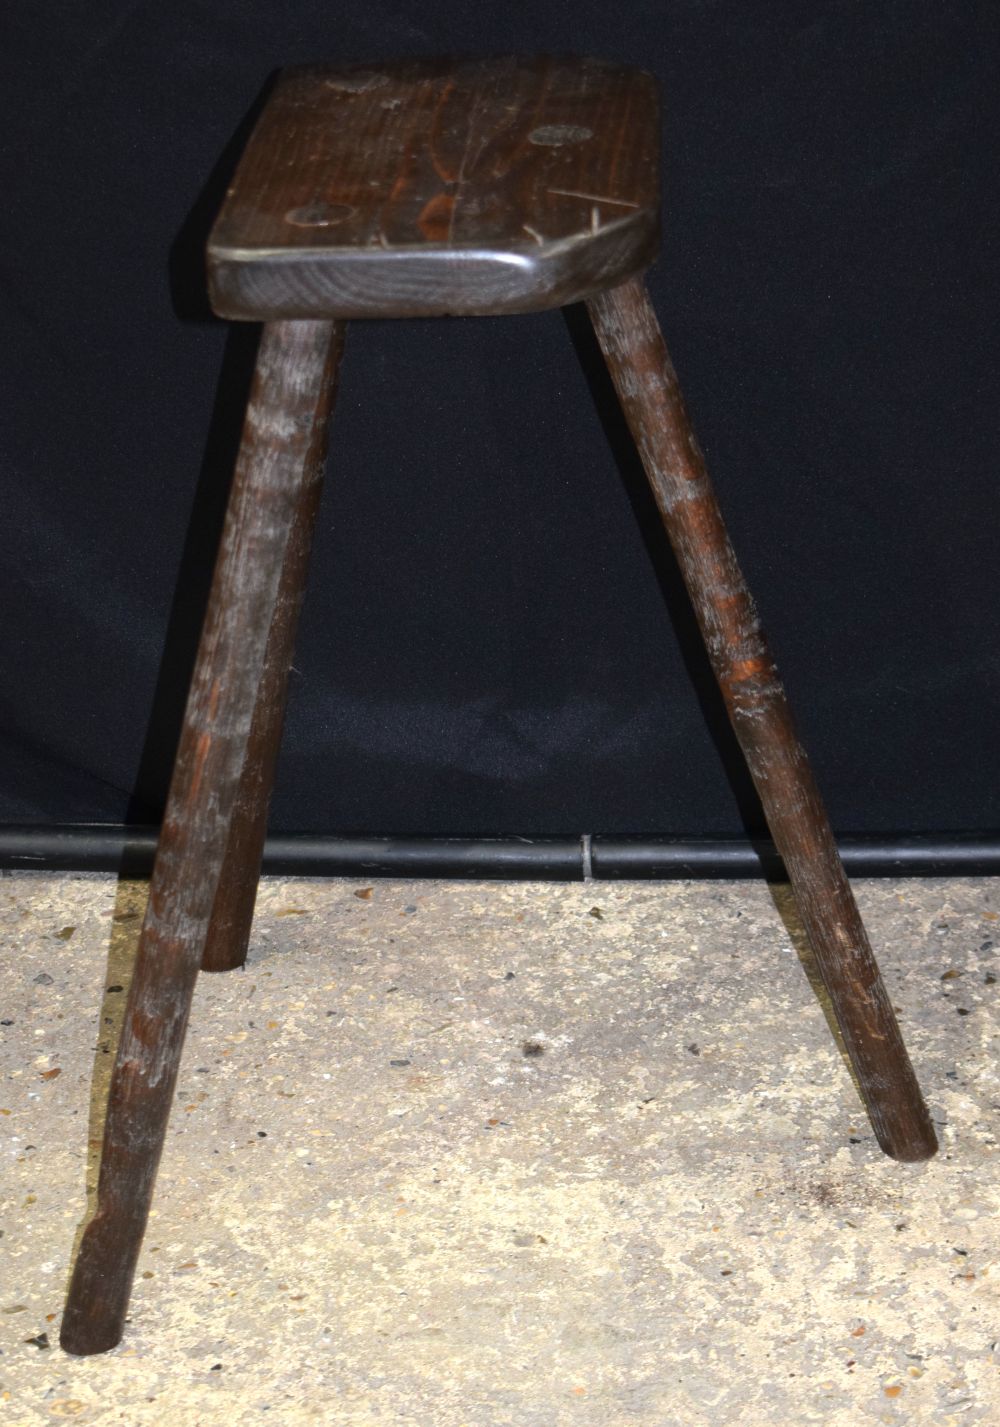 An wooden Cutlers stool 61 zx 36 x 21 cm. - Image 5 of 6